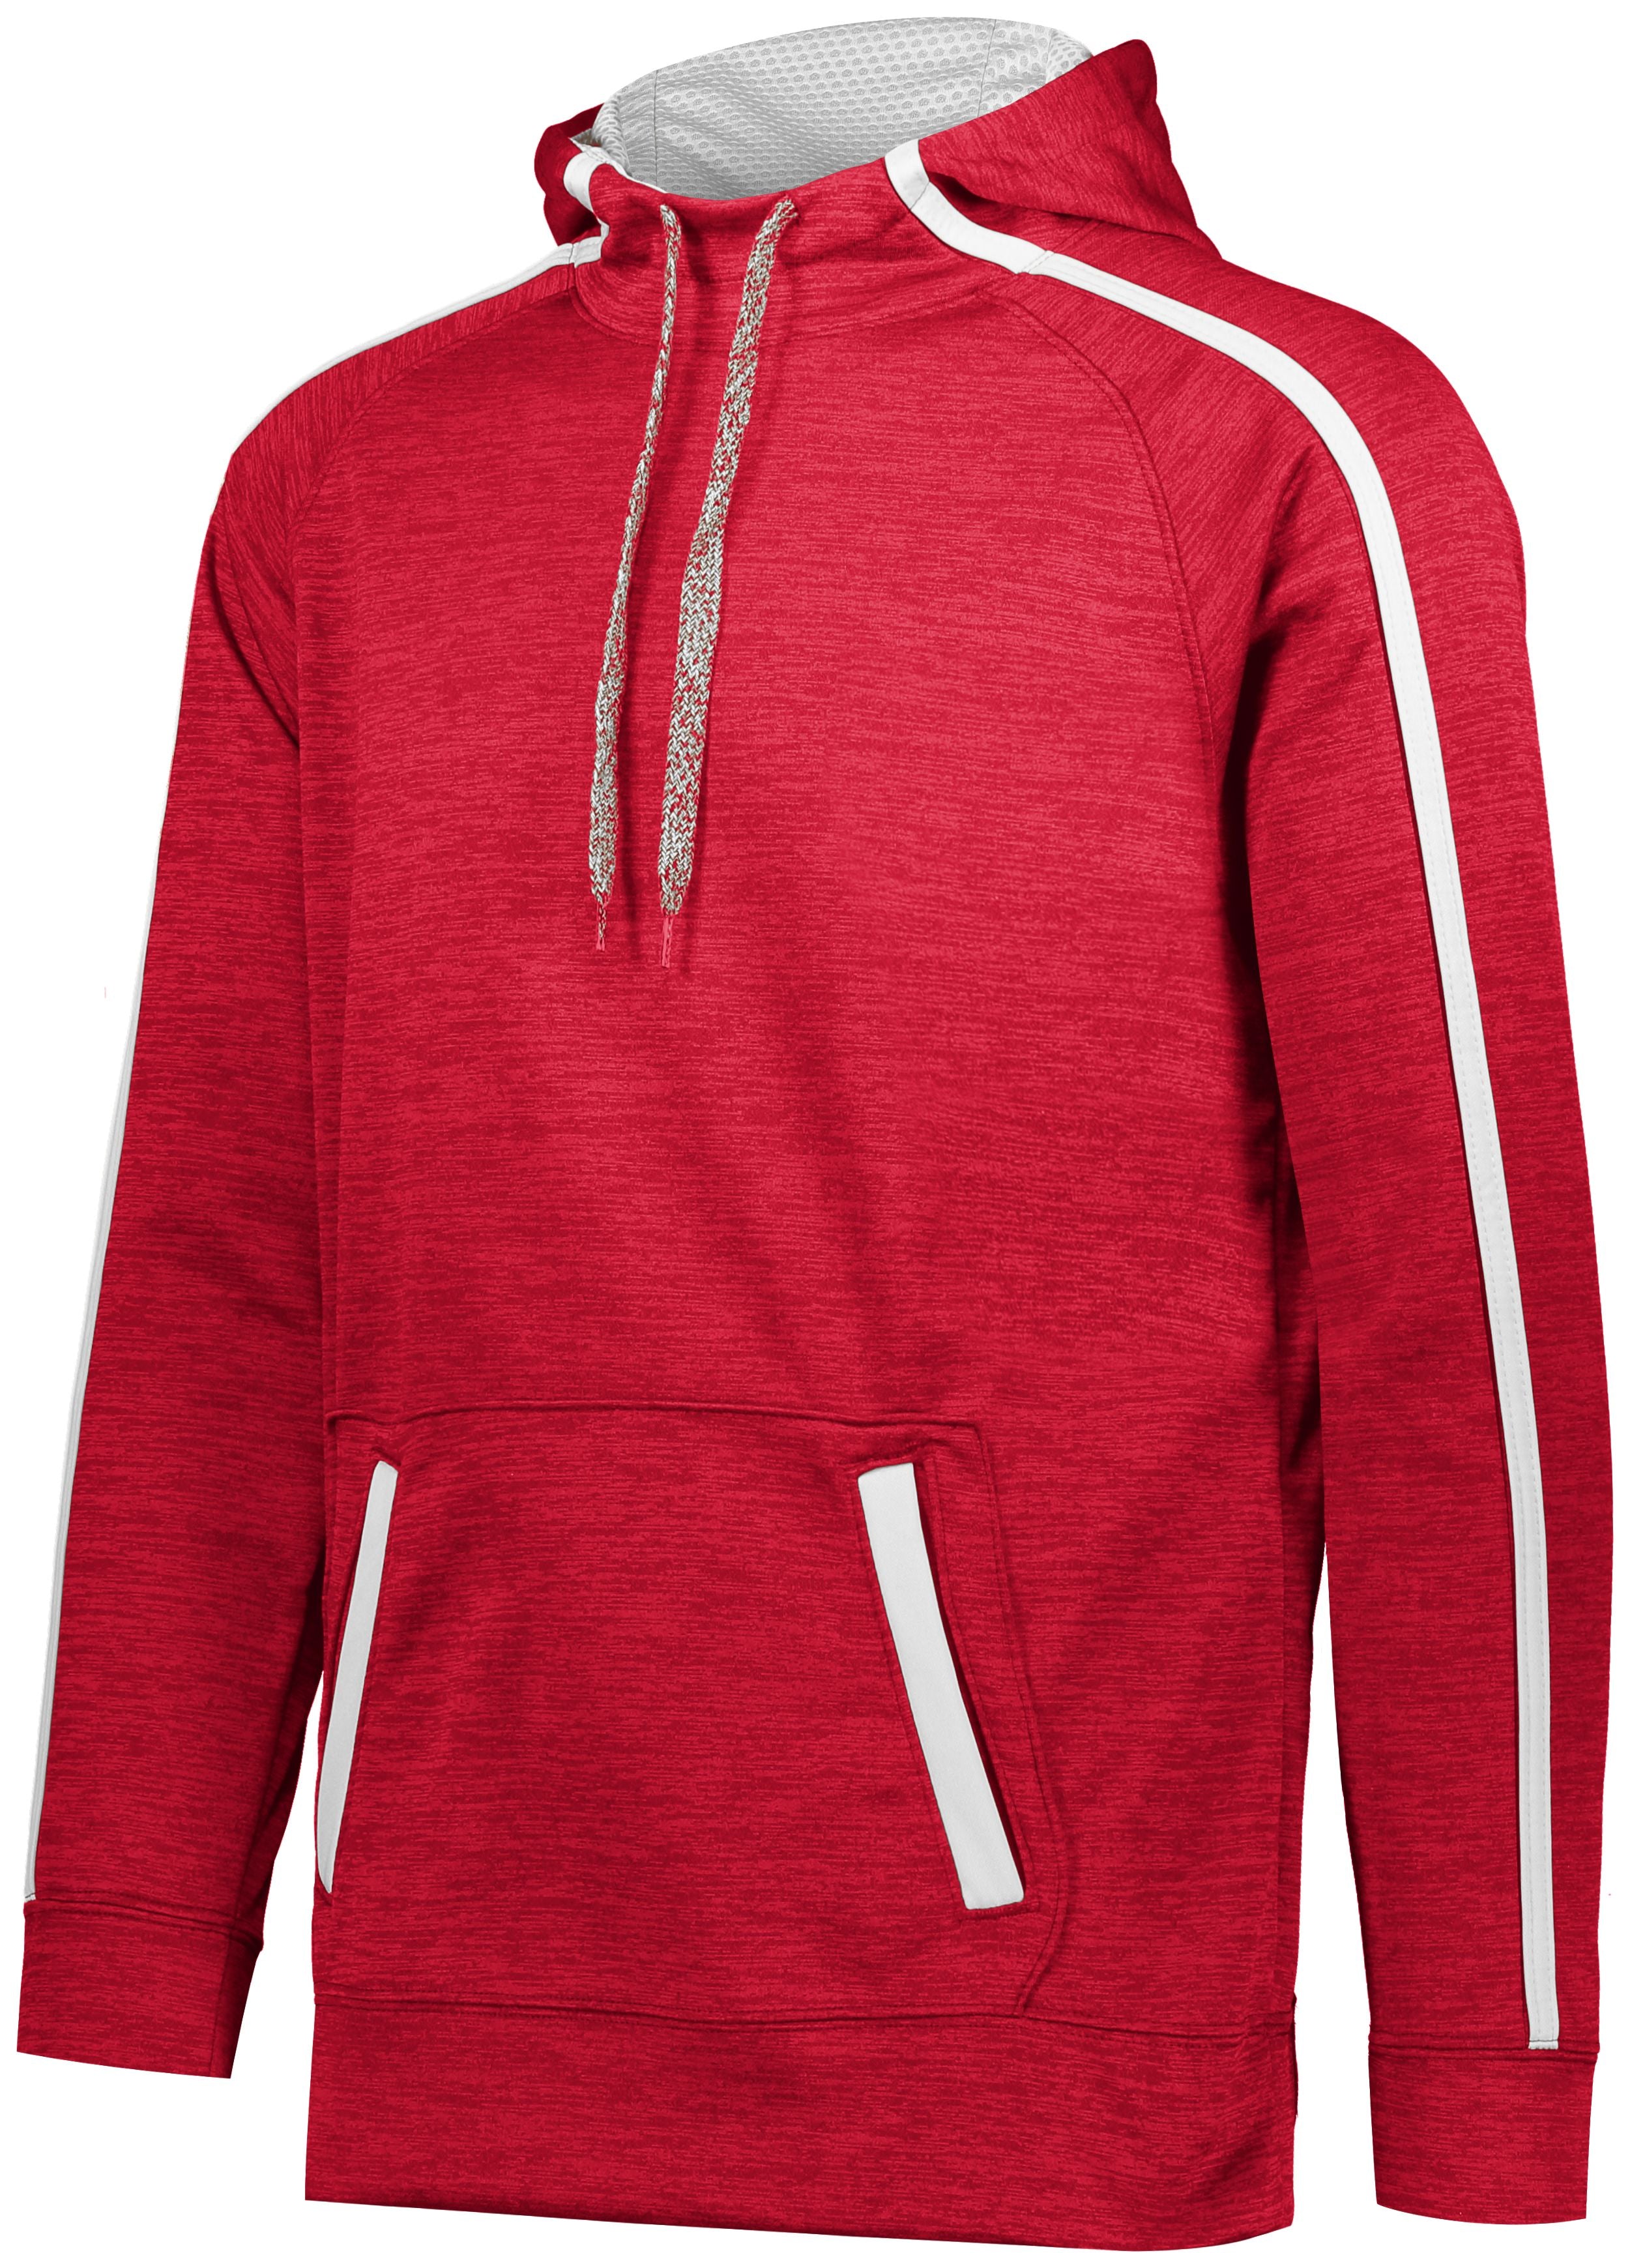 Augusta Sportswear Stoked Tonal Heather Hoodie in Red/White  -Part of the Adult, Augusta-Products, Shirts, Tonal-Fleece-Collection product lines at KanaleyCreations.com